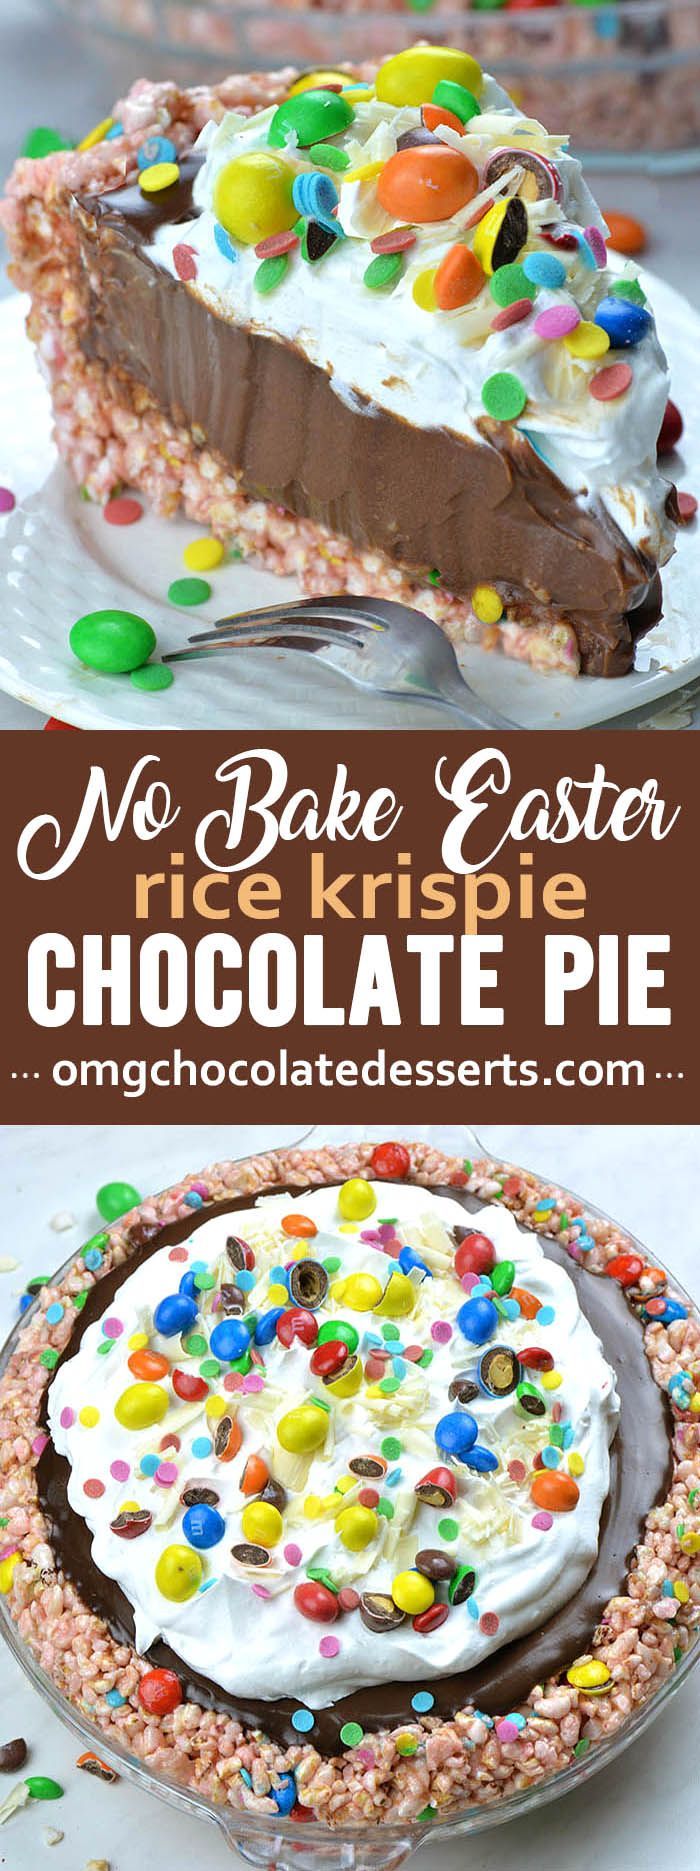 No Bake Easter Chocolate Pie -   15 desserts Easy easter ideas